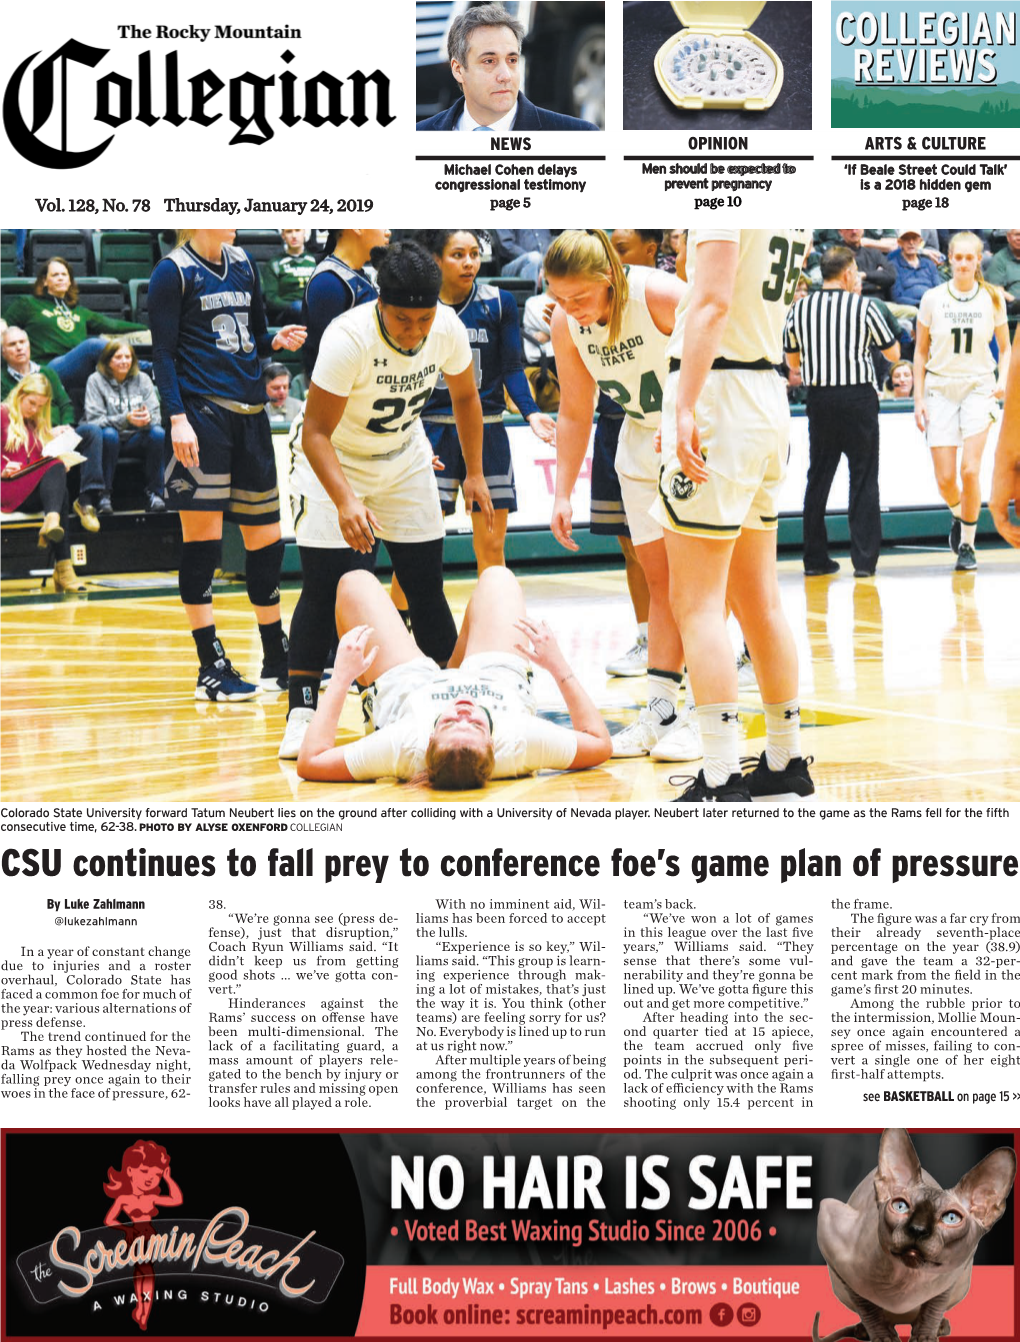 CSU Continues to Fall Prey to Conference Foe's Game Plan Of